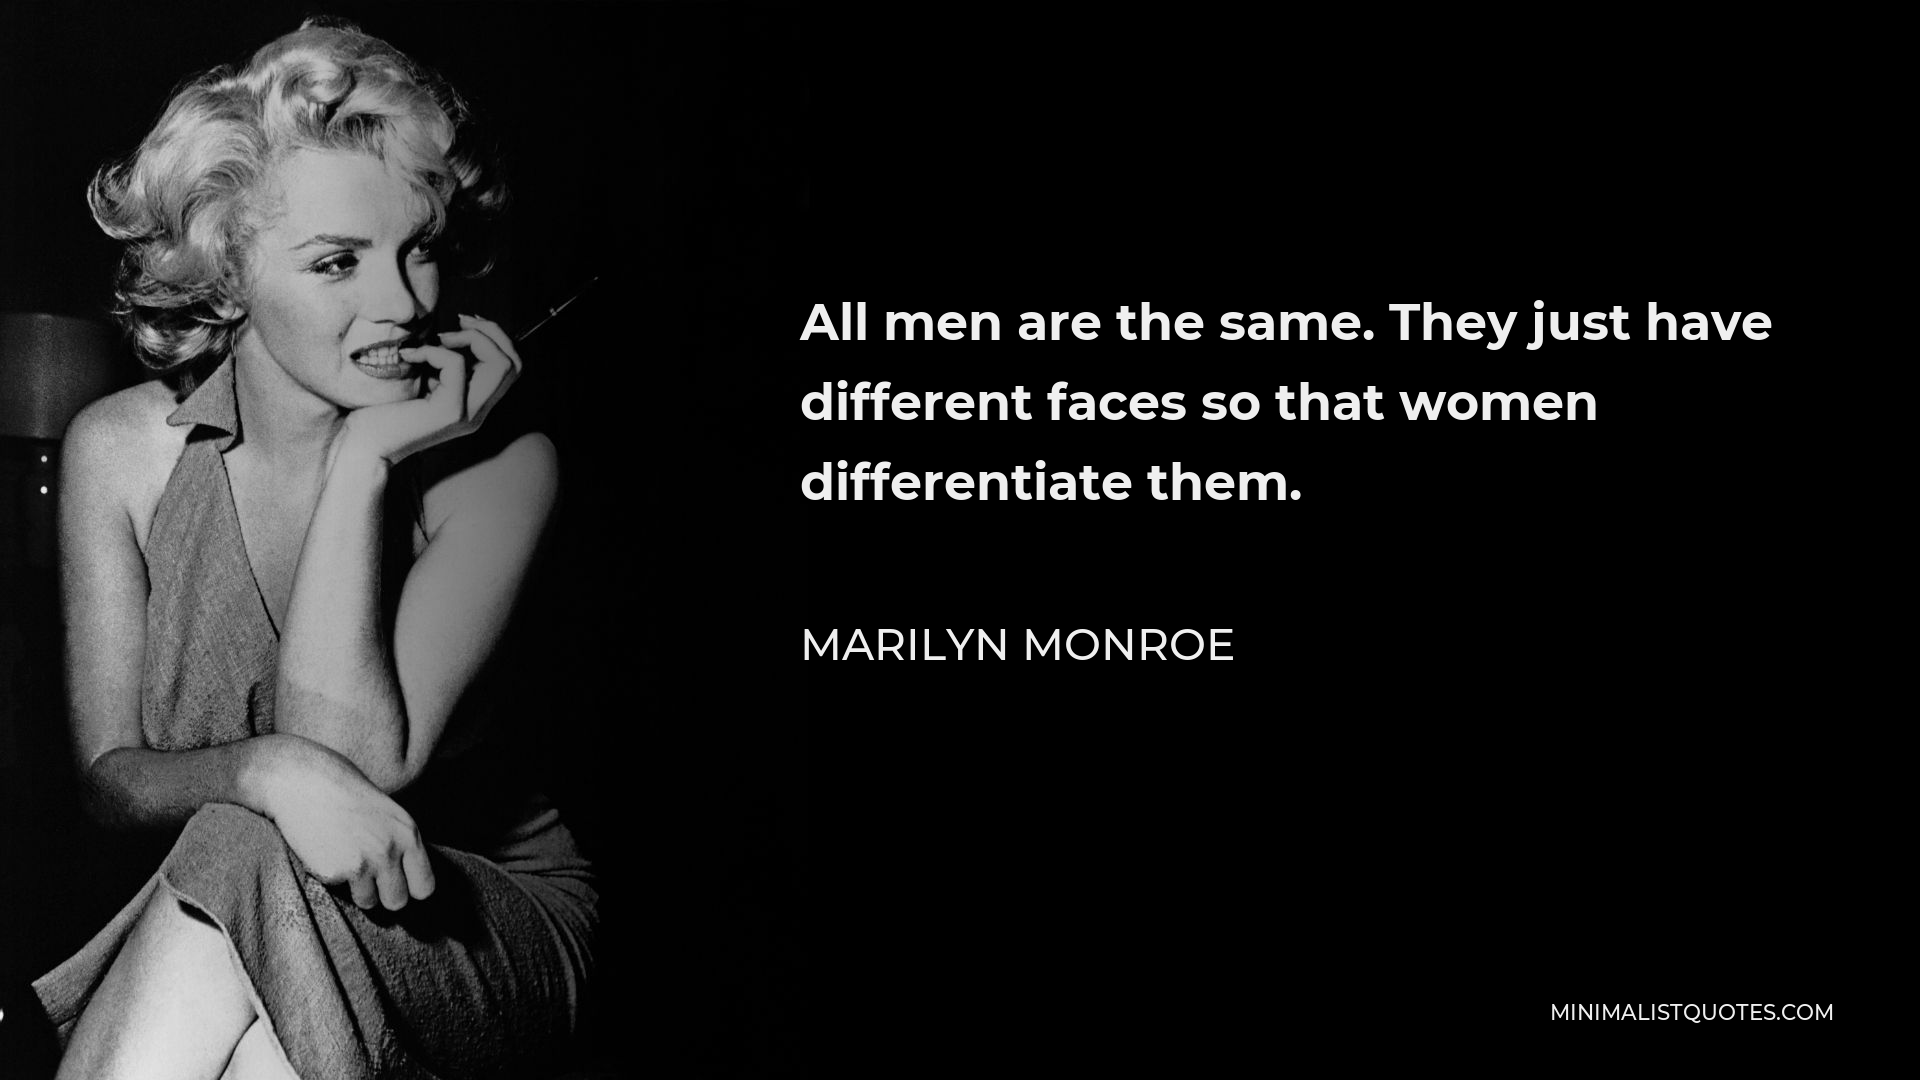 Marilyn Monroe Quote - All men are the same. They just have different faces so that women differentiate them.